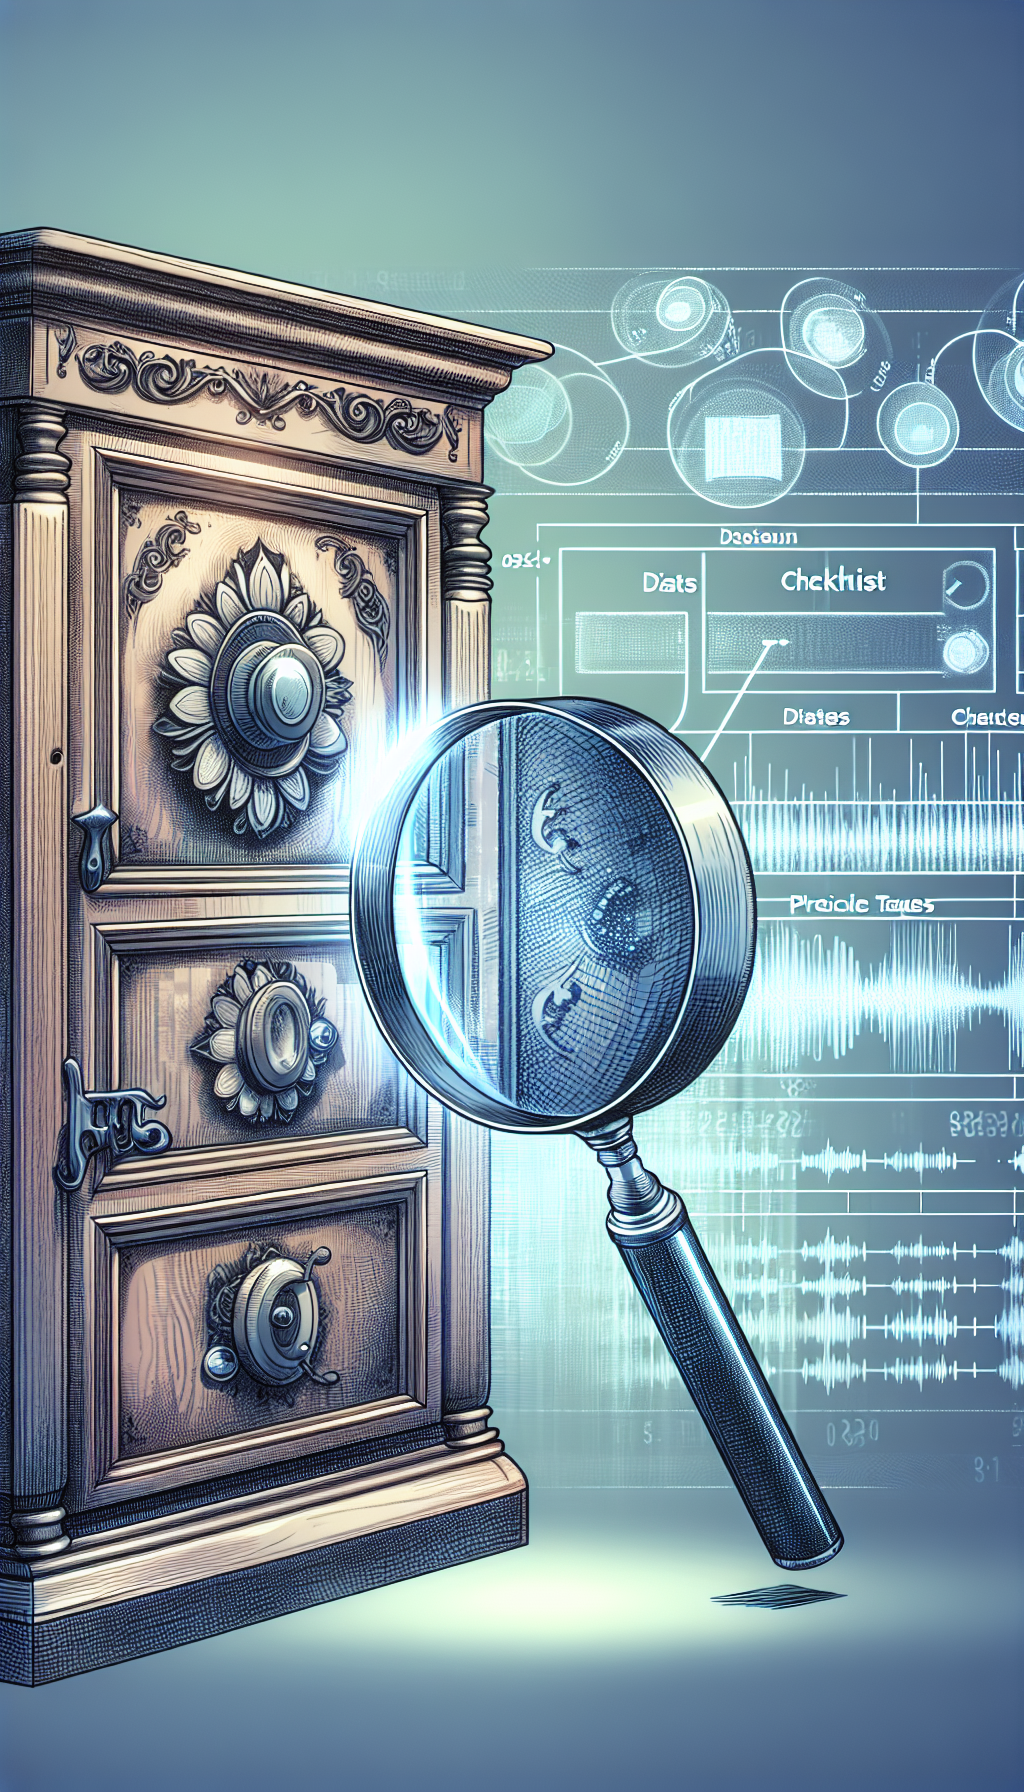 An illustration features a magnifying glass hovering over the distinctive metal nameplate of an ornate Hoosier cabinet, with dates and a checklist inscribed in the lens, symbolizing the verification process. The cabinet radiates a soft glow, indicating its value, while faint price tags and historical timelines float in the background, merging styles of vintage etching and modern clean lines to represent past and current significance.